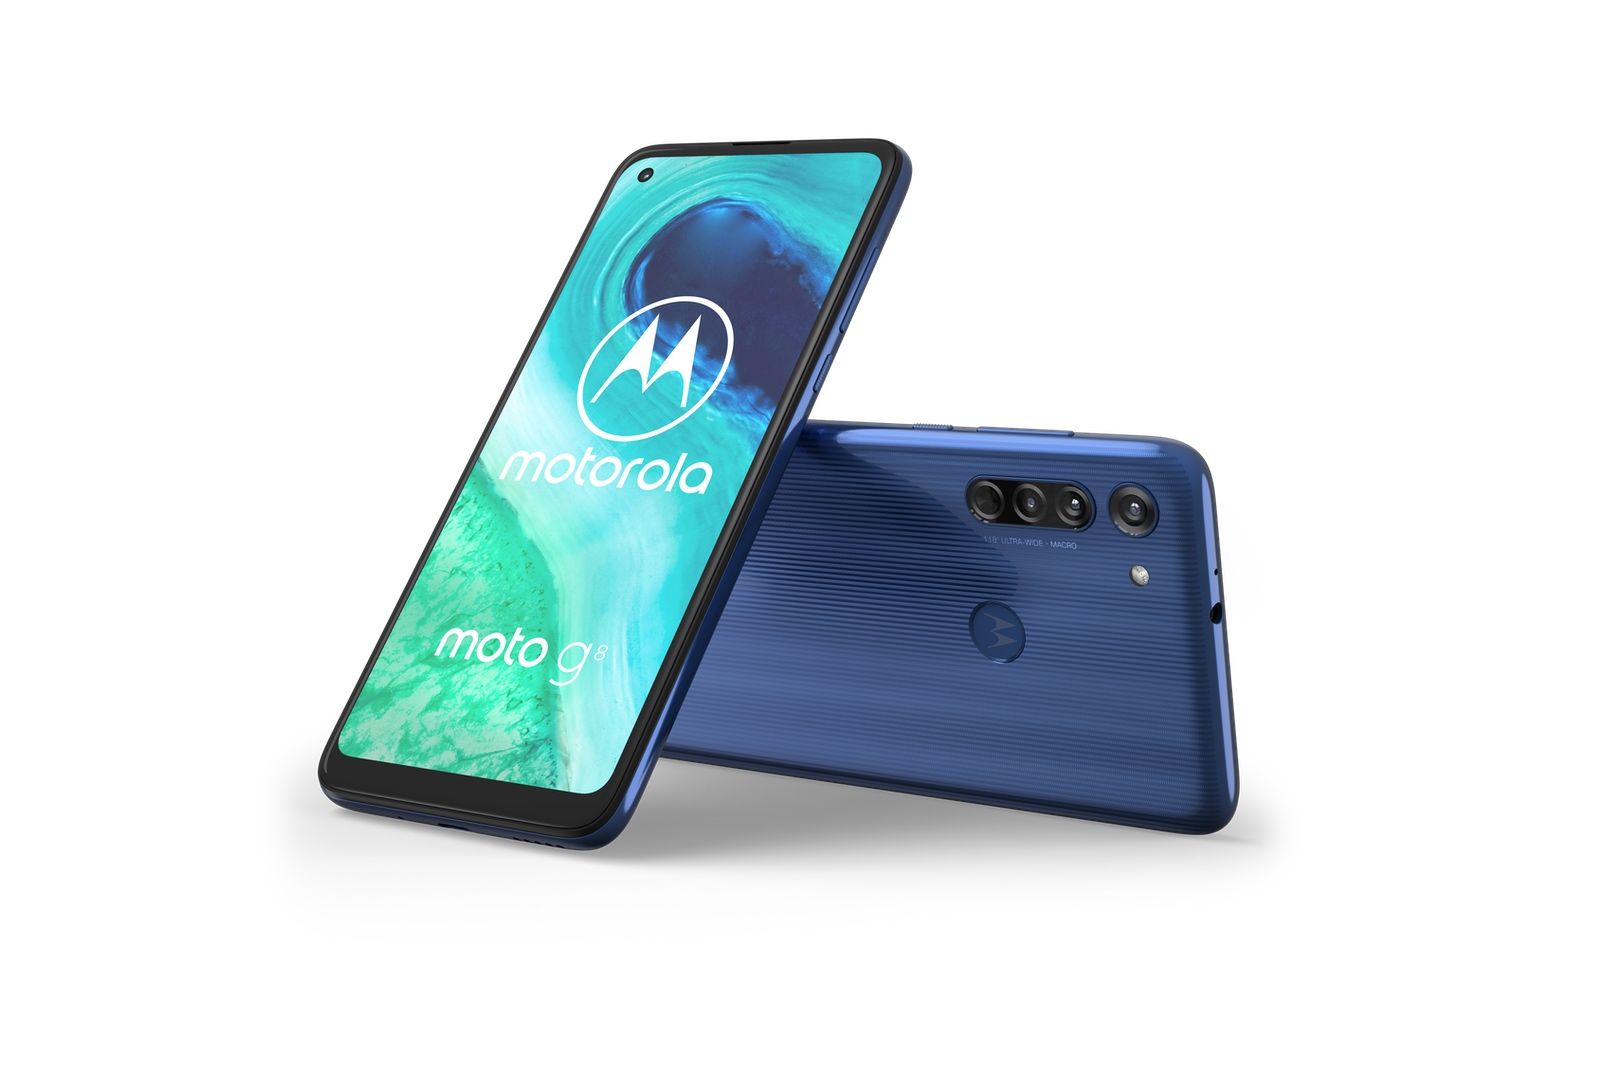 Motorola puts the focus on photography with its new Moto G8 smartphone image 1